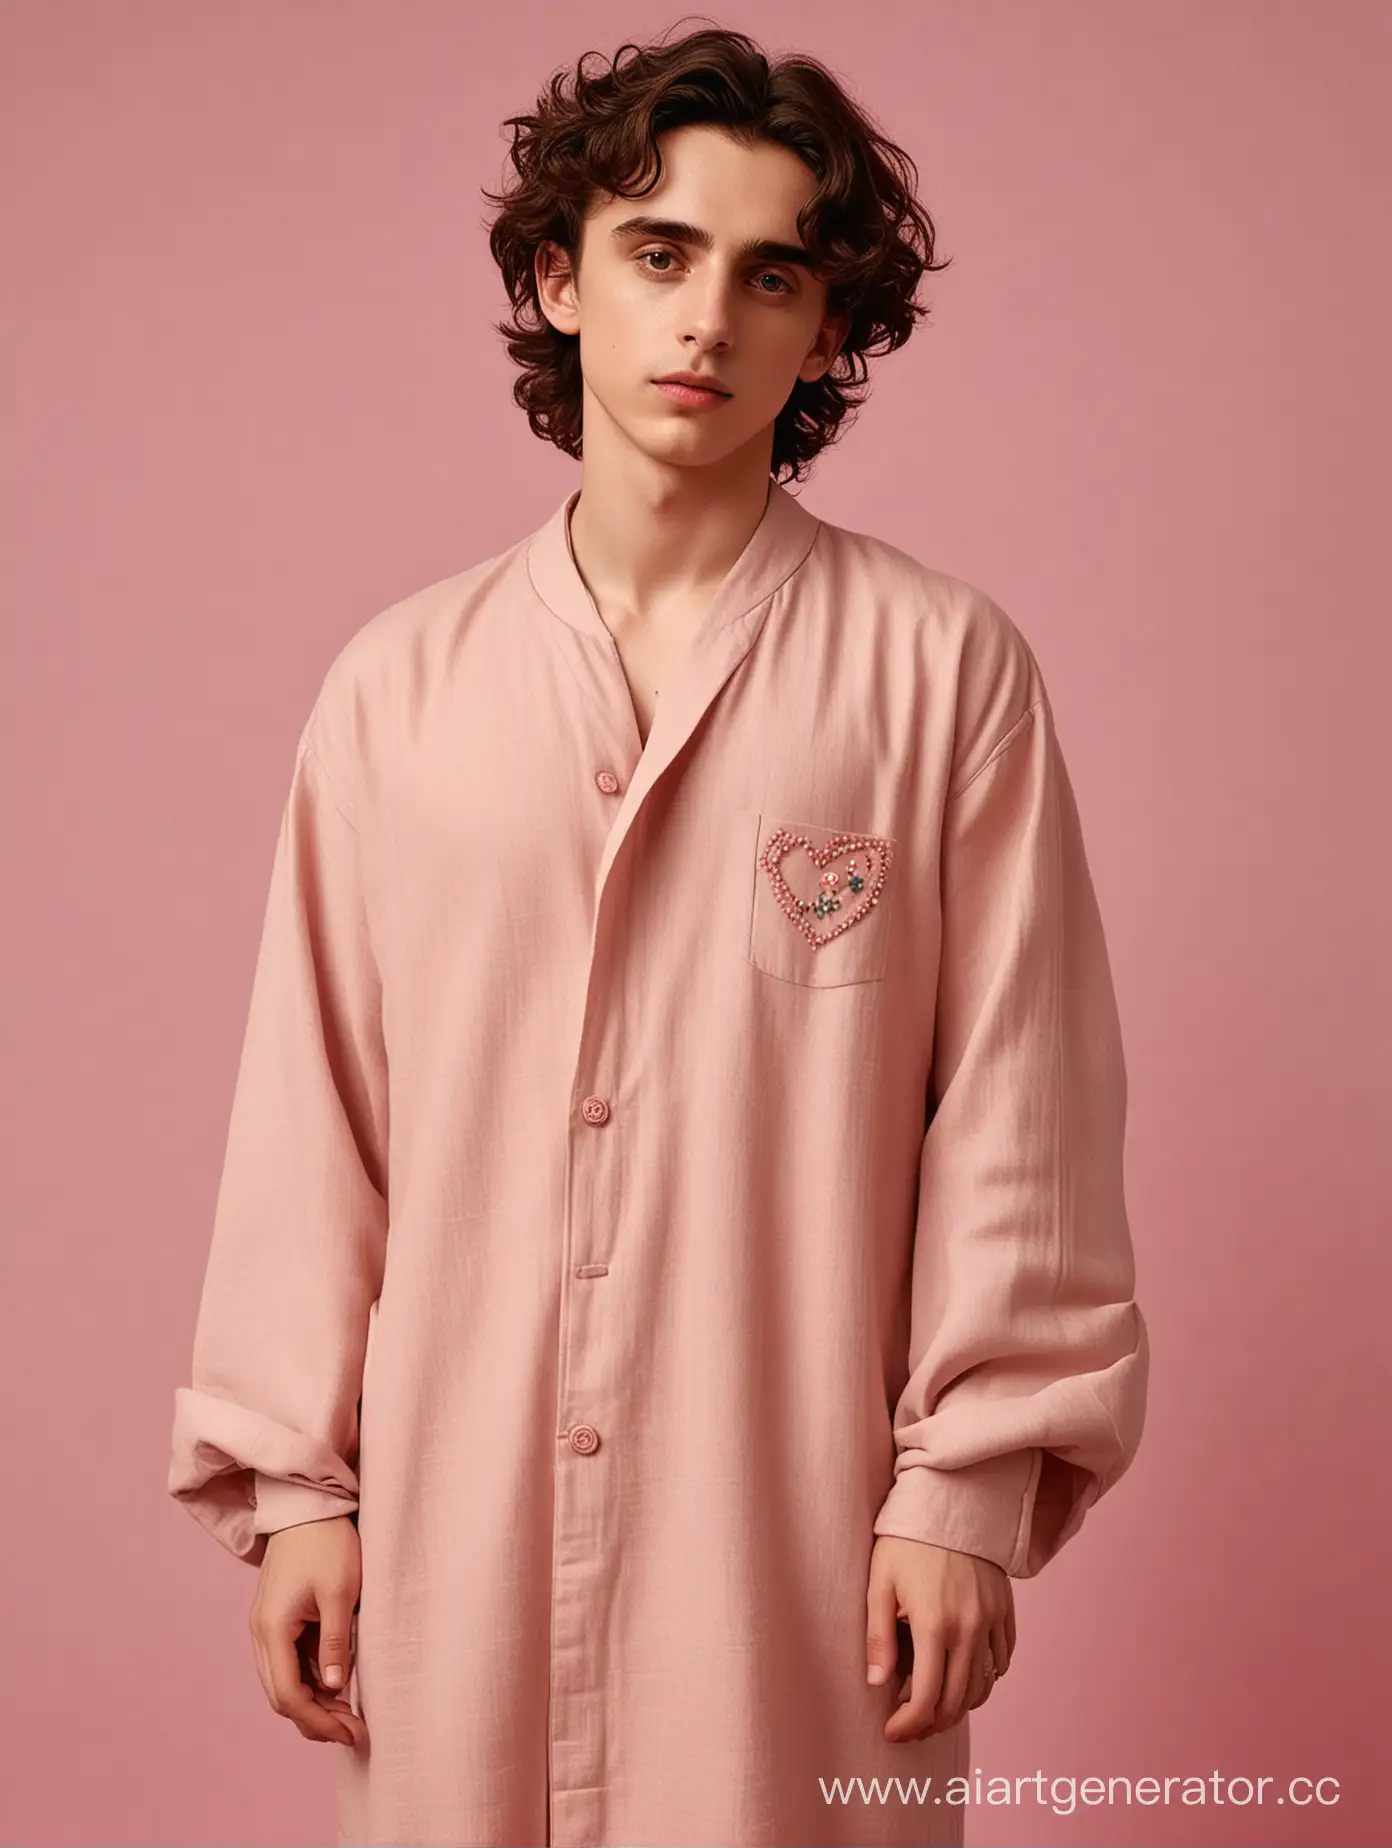 can you please make a realistic photo of timothee chalamet in a pink room in a beige modern linen abayas with small embroidery hearts on the bottom of sleeves